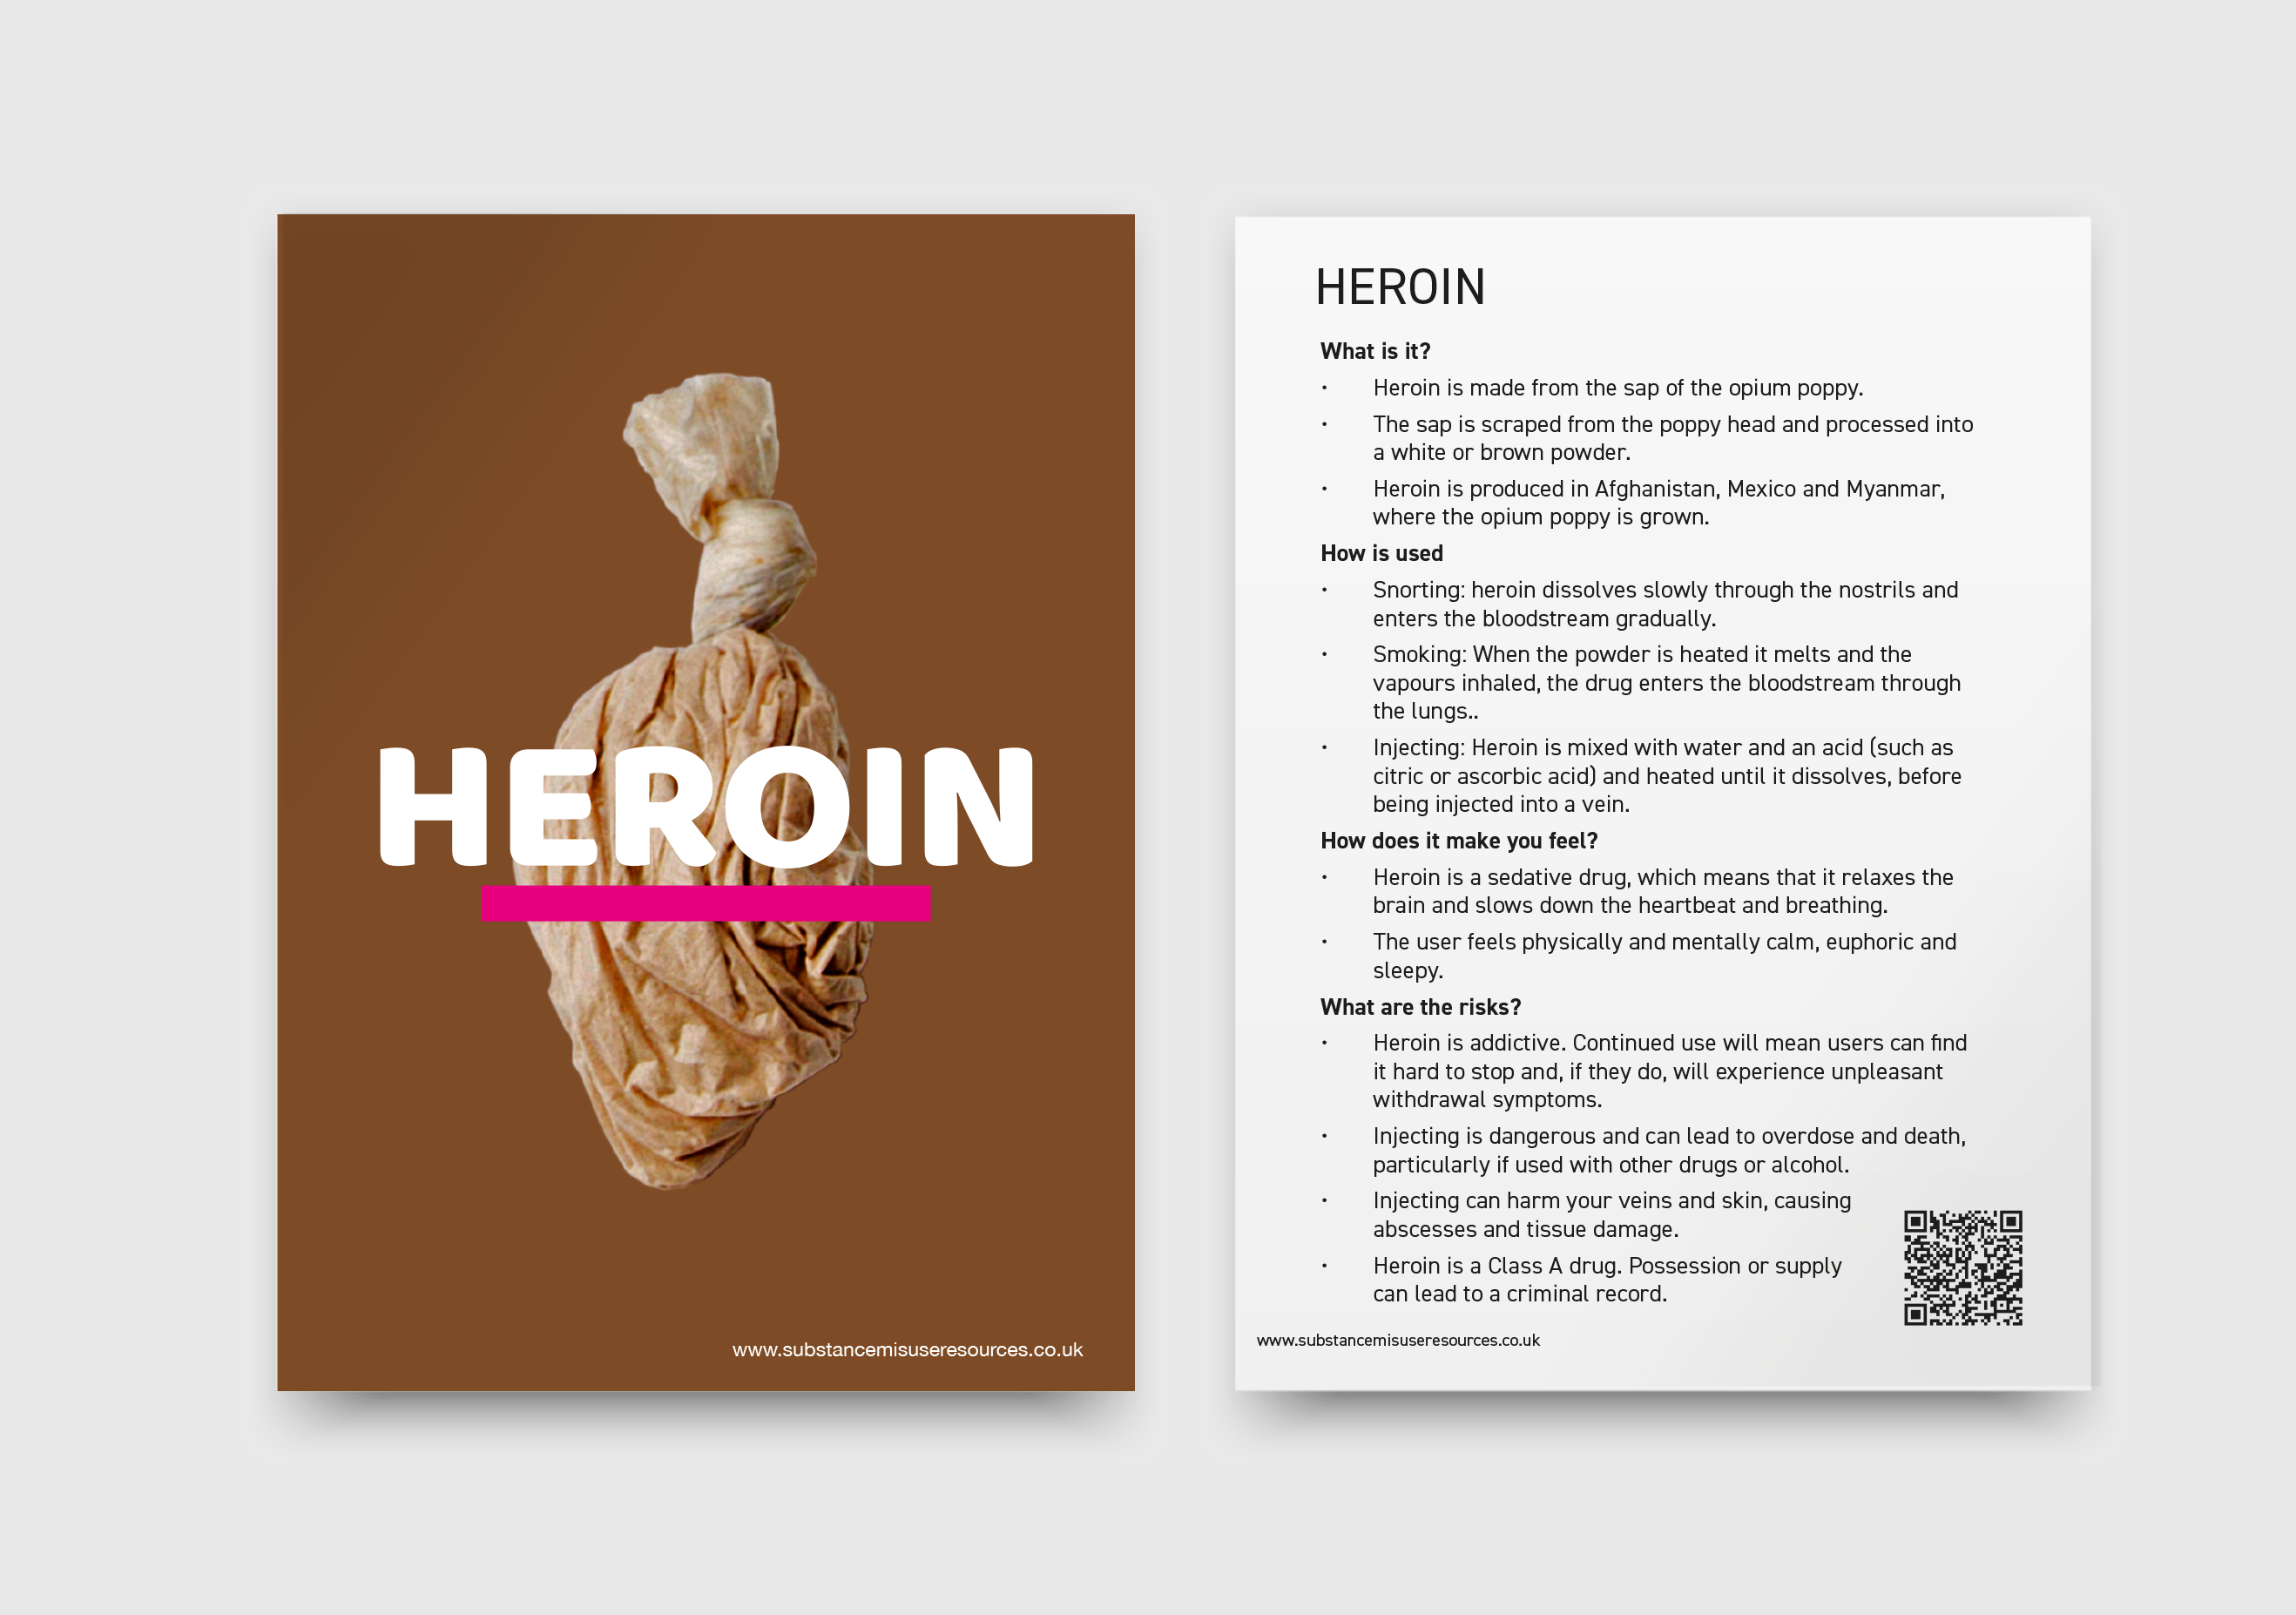 A6, postcard-style Heroin education resource. Bag of heroin on front and heroin information on reverse